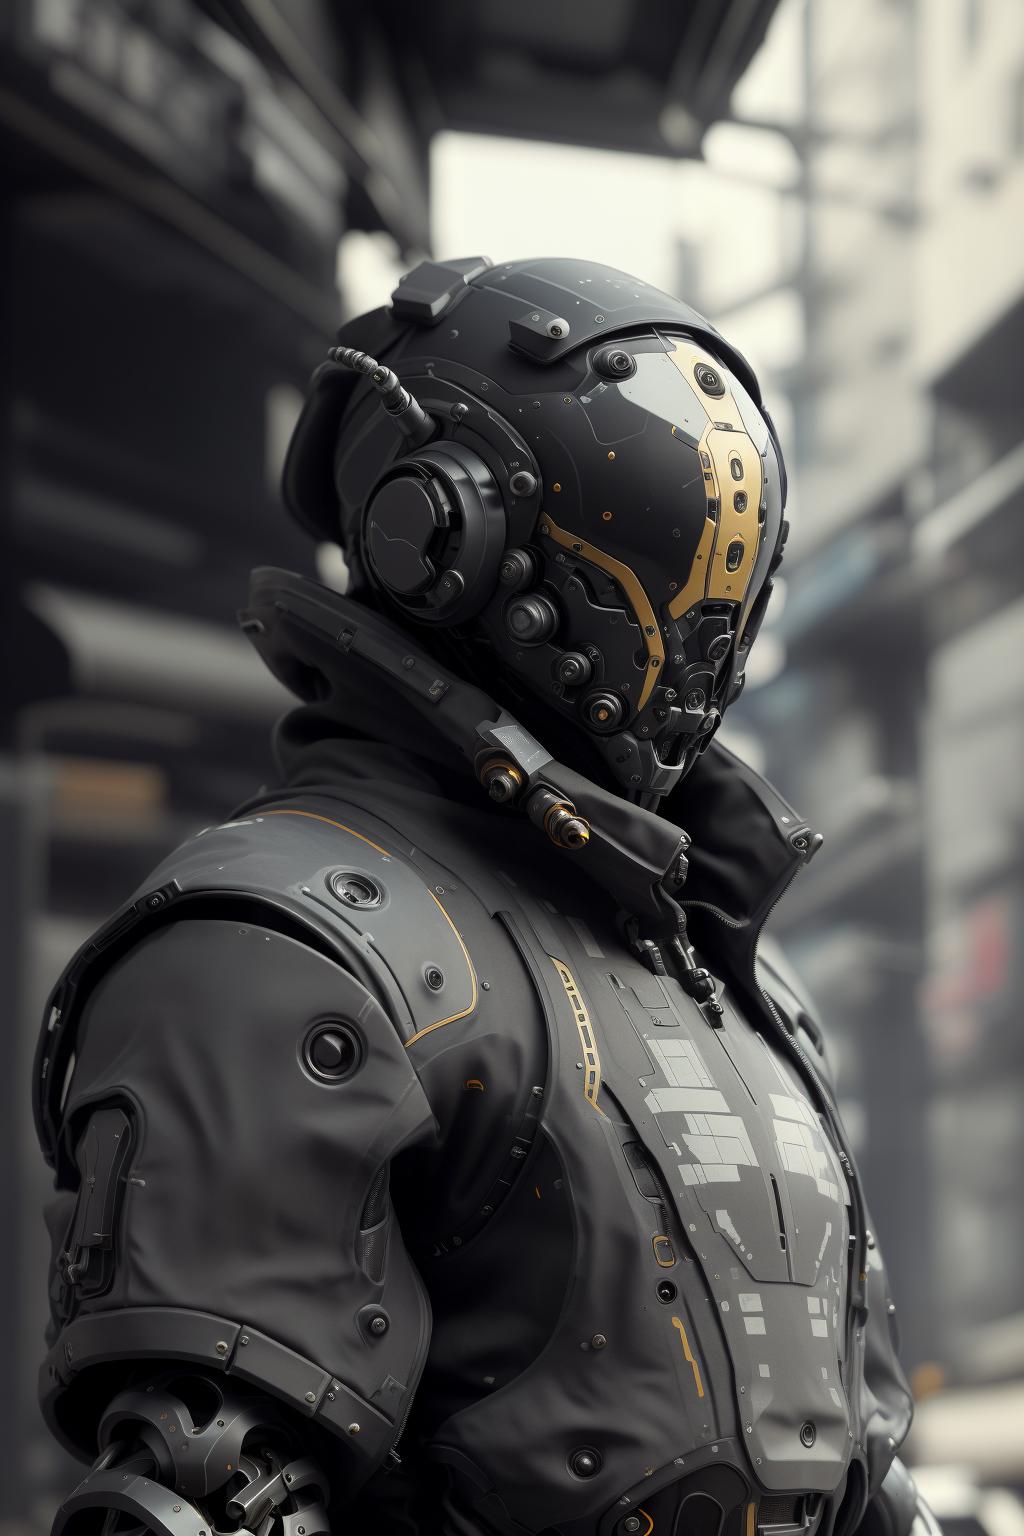 Futuristic Robotic Warrior with Grey and Gold Armor